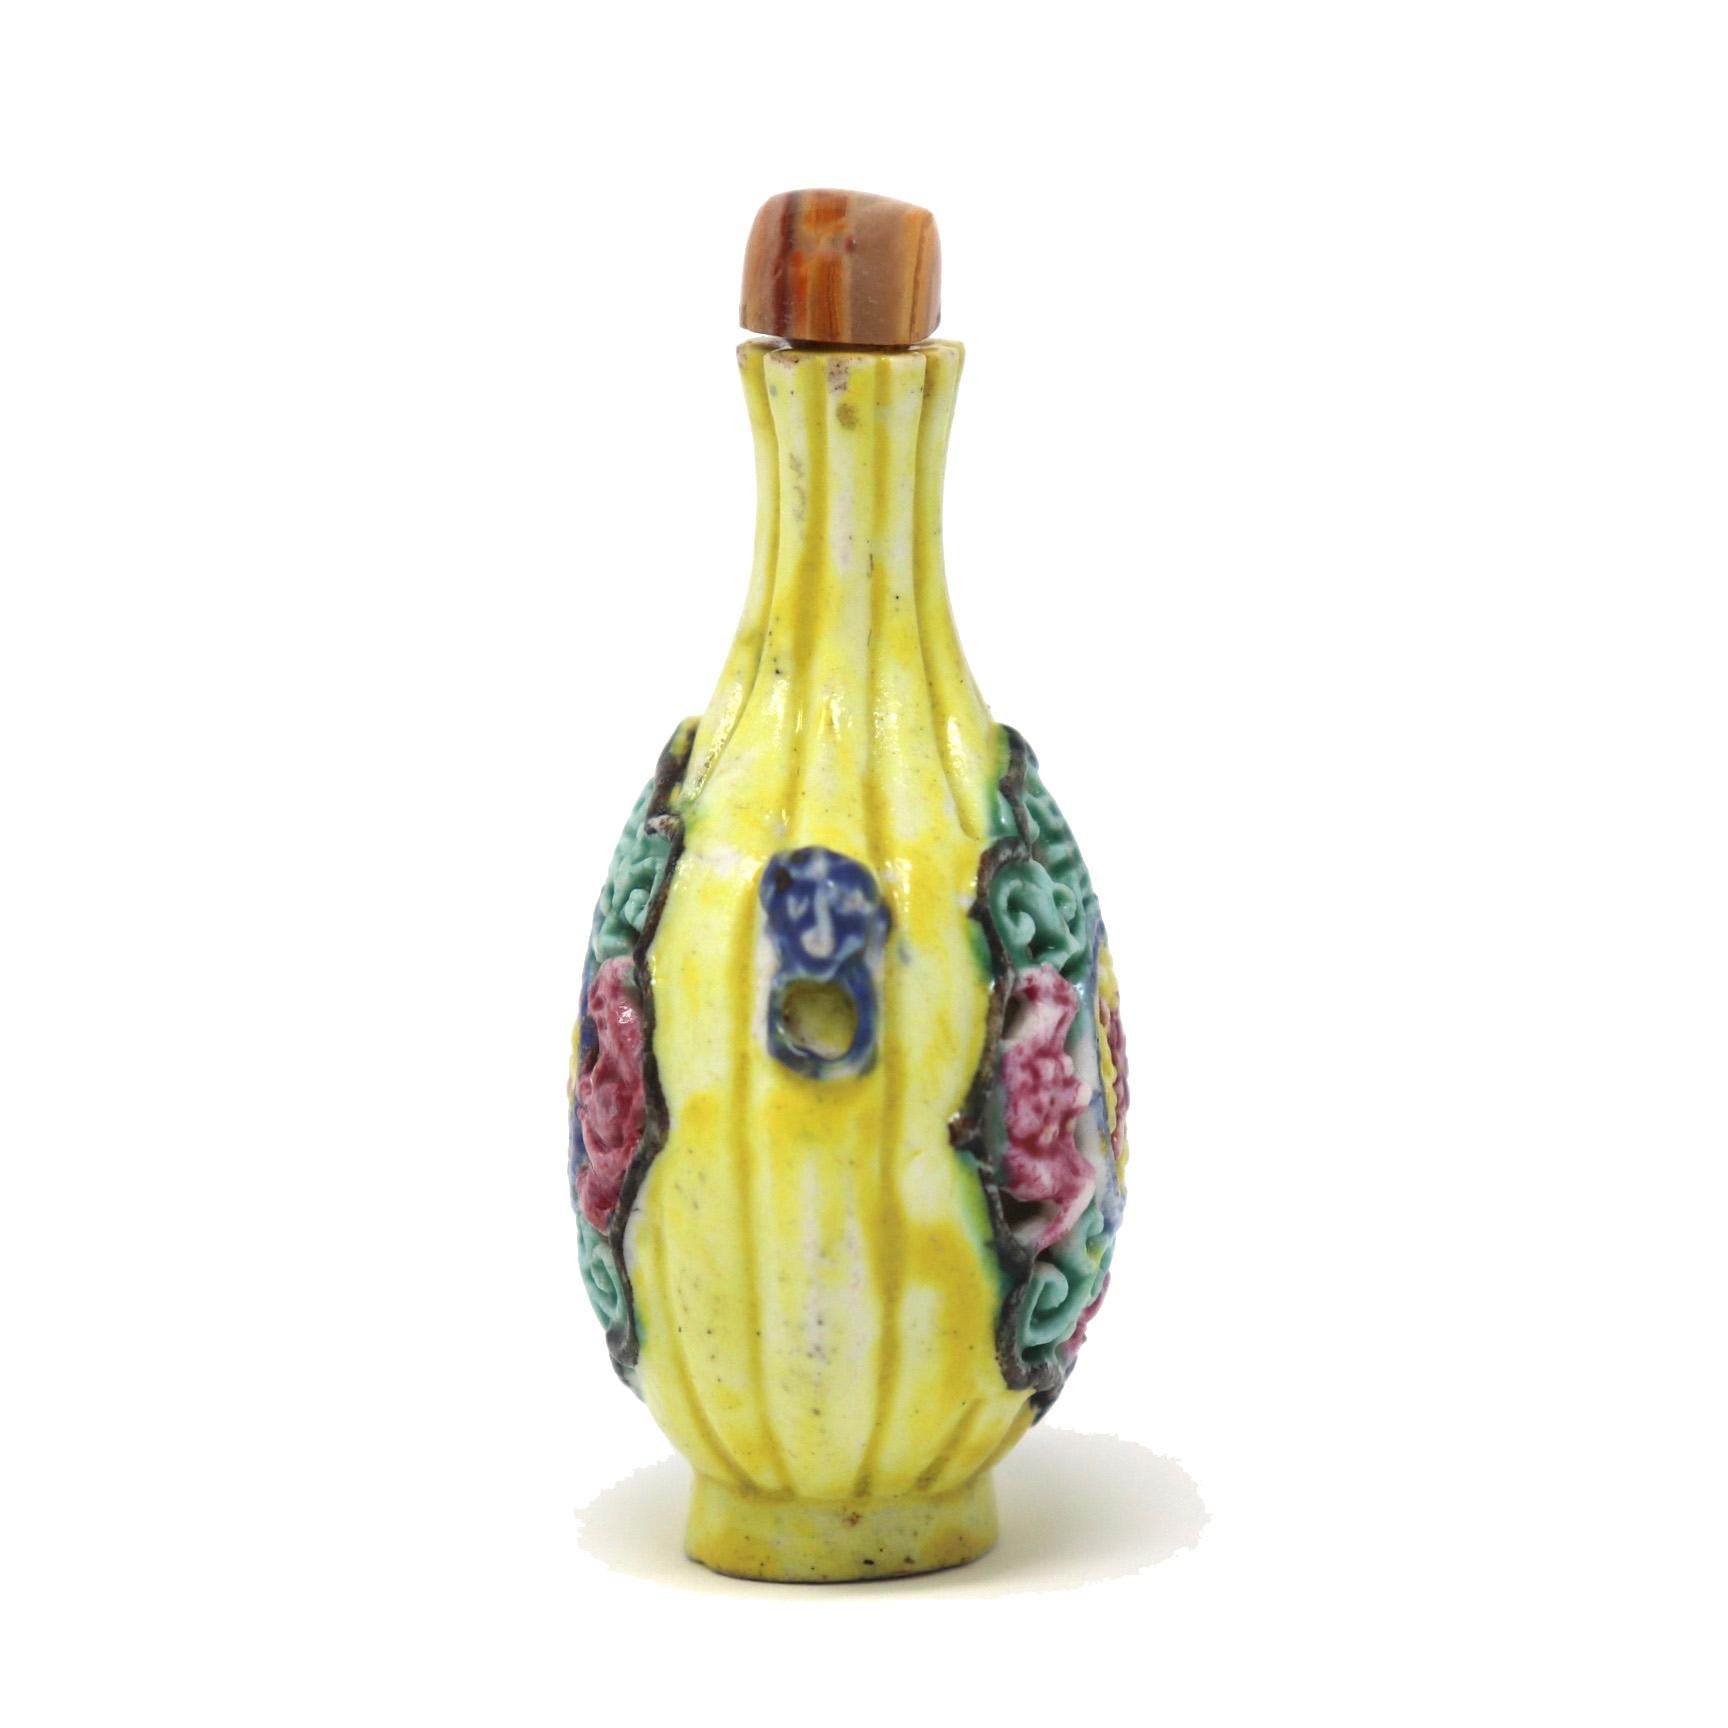 Glazed Antique Chinese Reticulated Soft Paste Porcelain Snuff Bottle